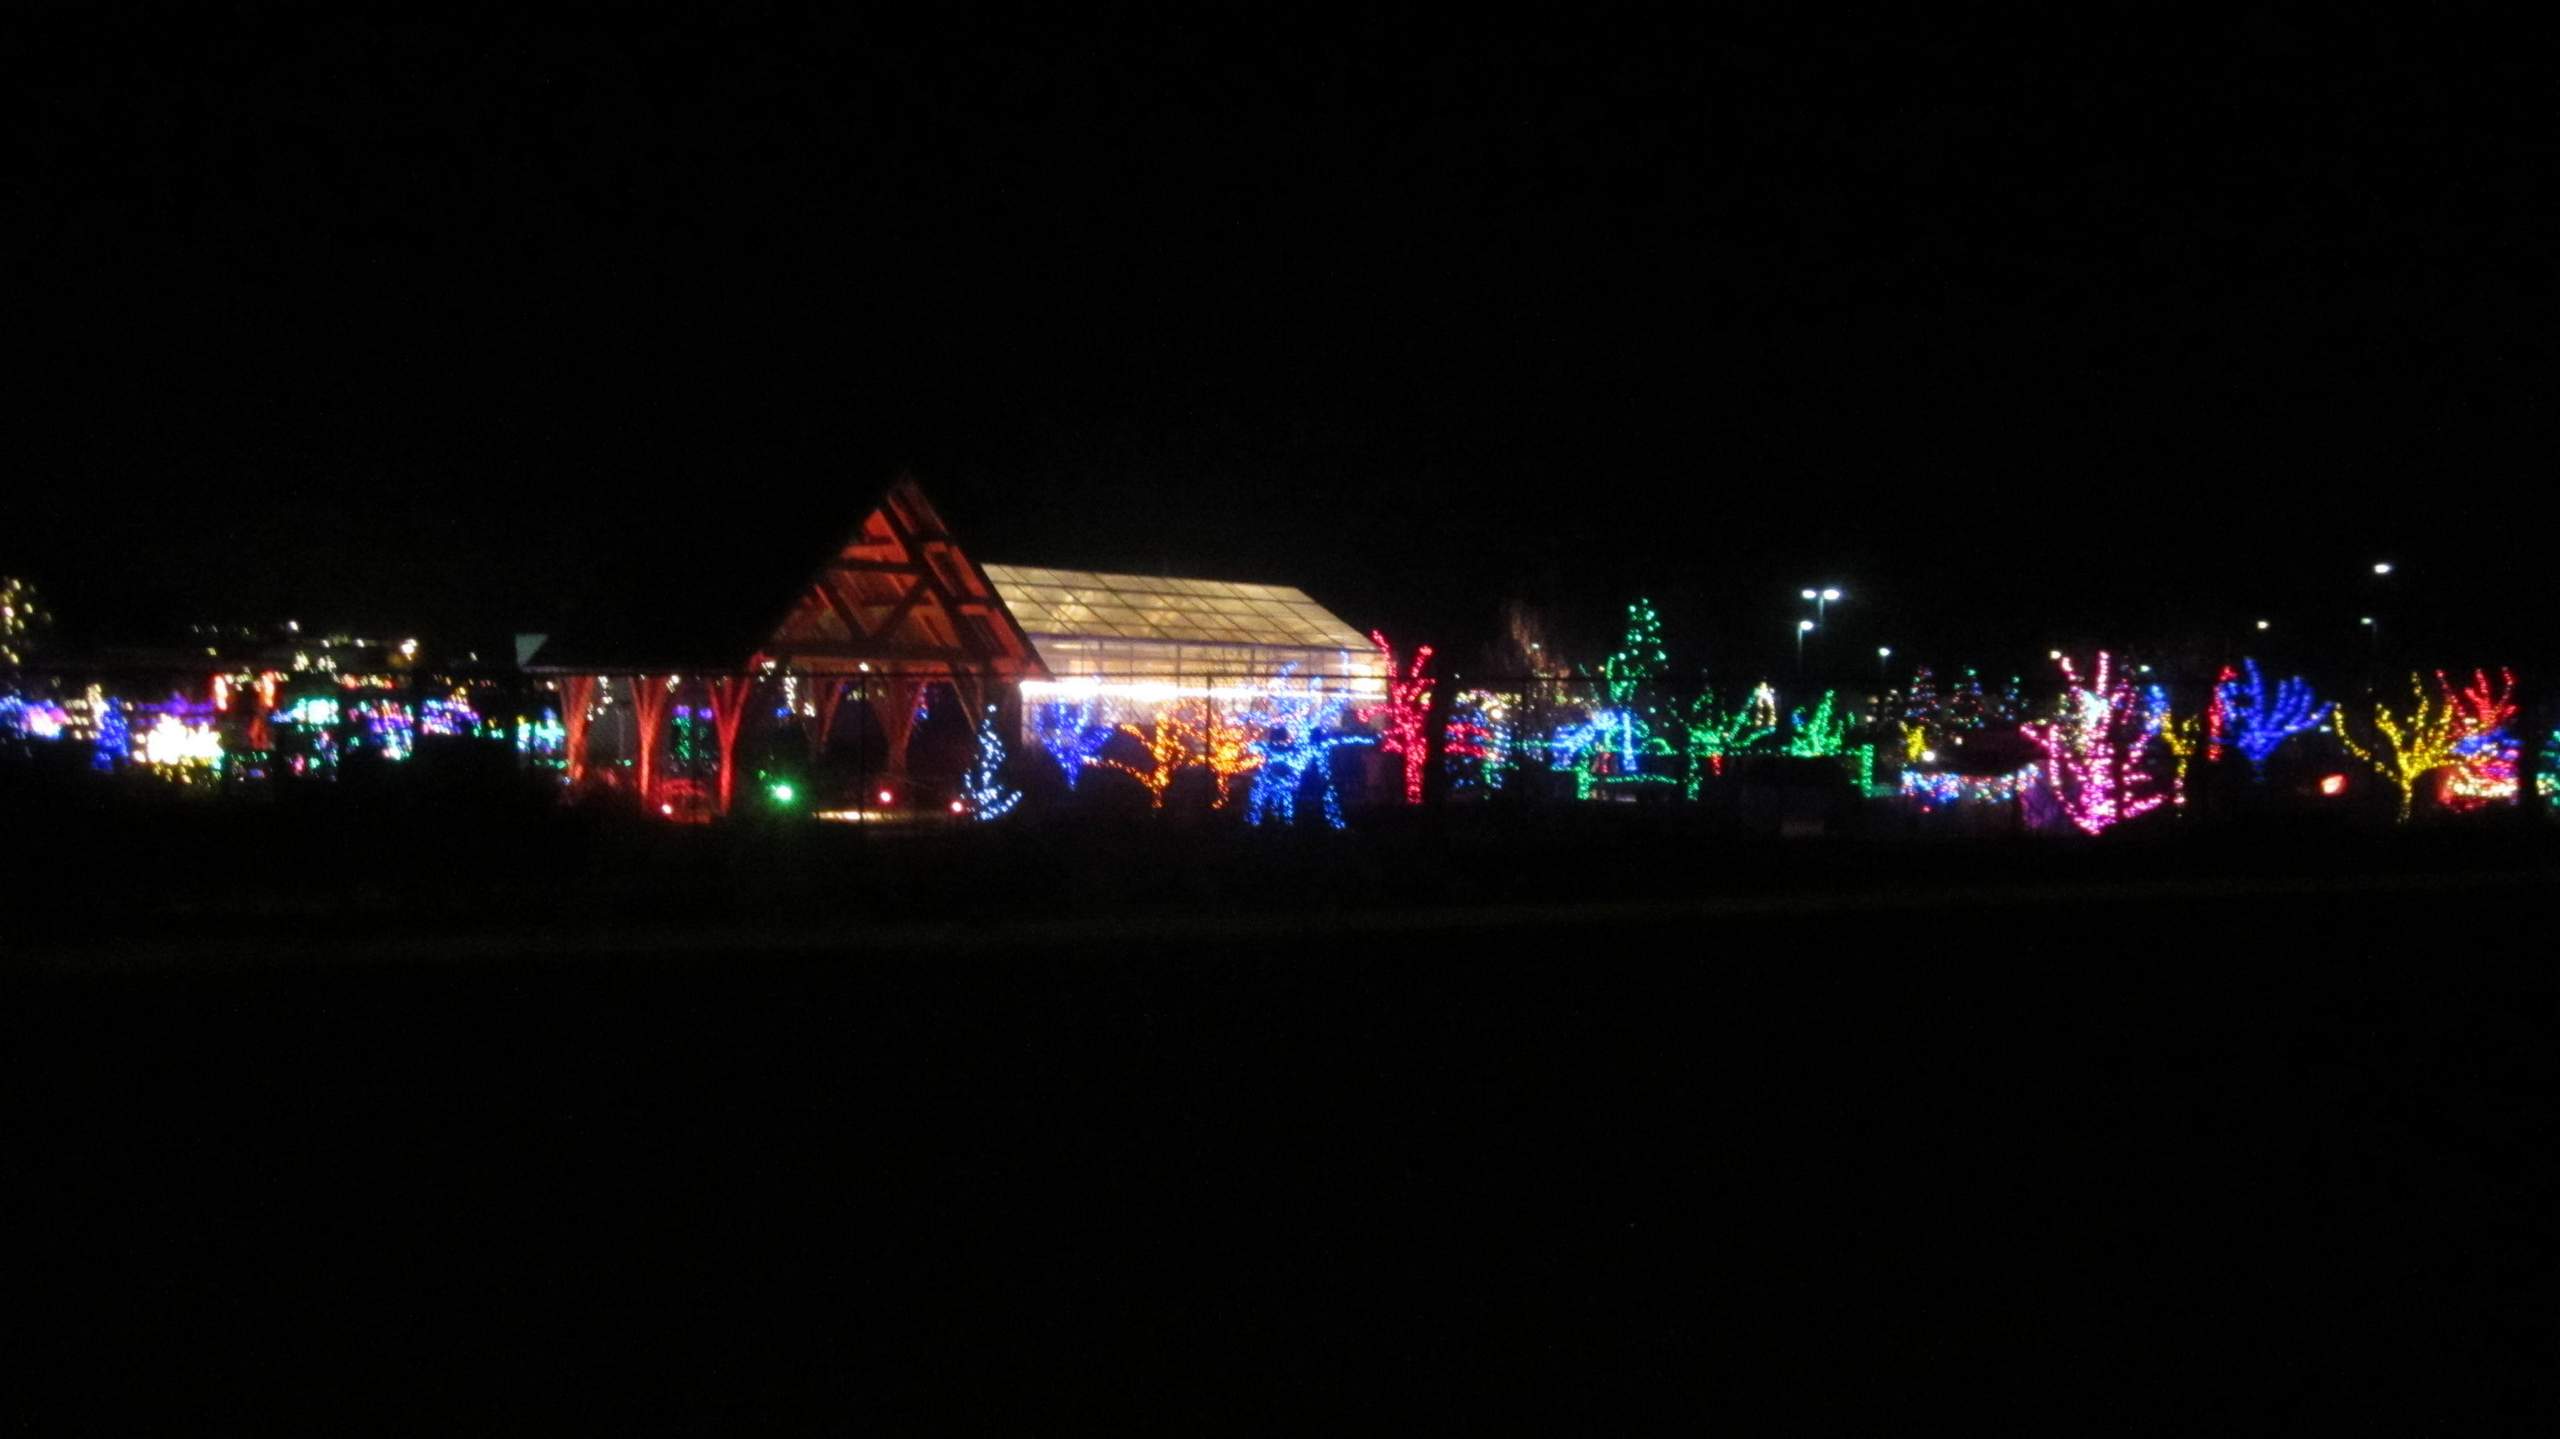 The Gardens at Spring Creek, as seen during the Fort Collins Running Club's Holiday Lights Run.